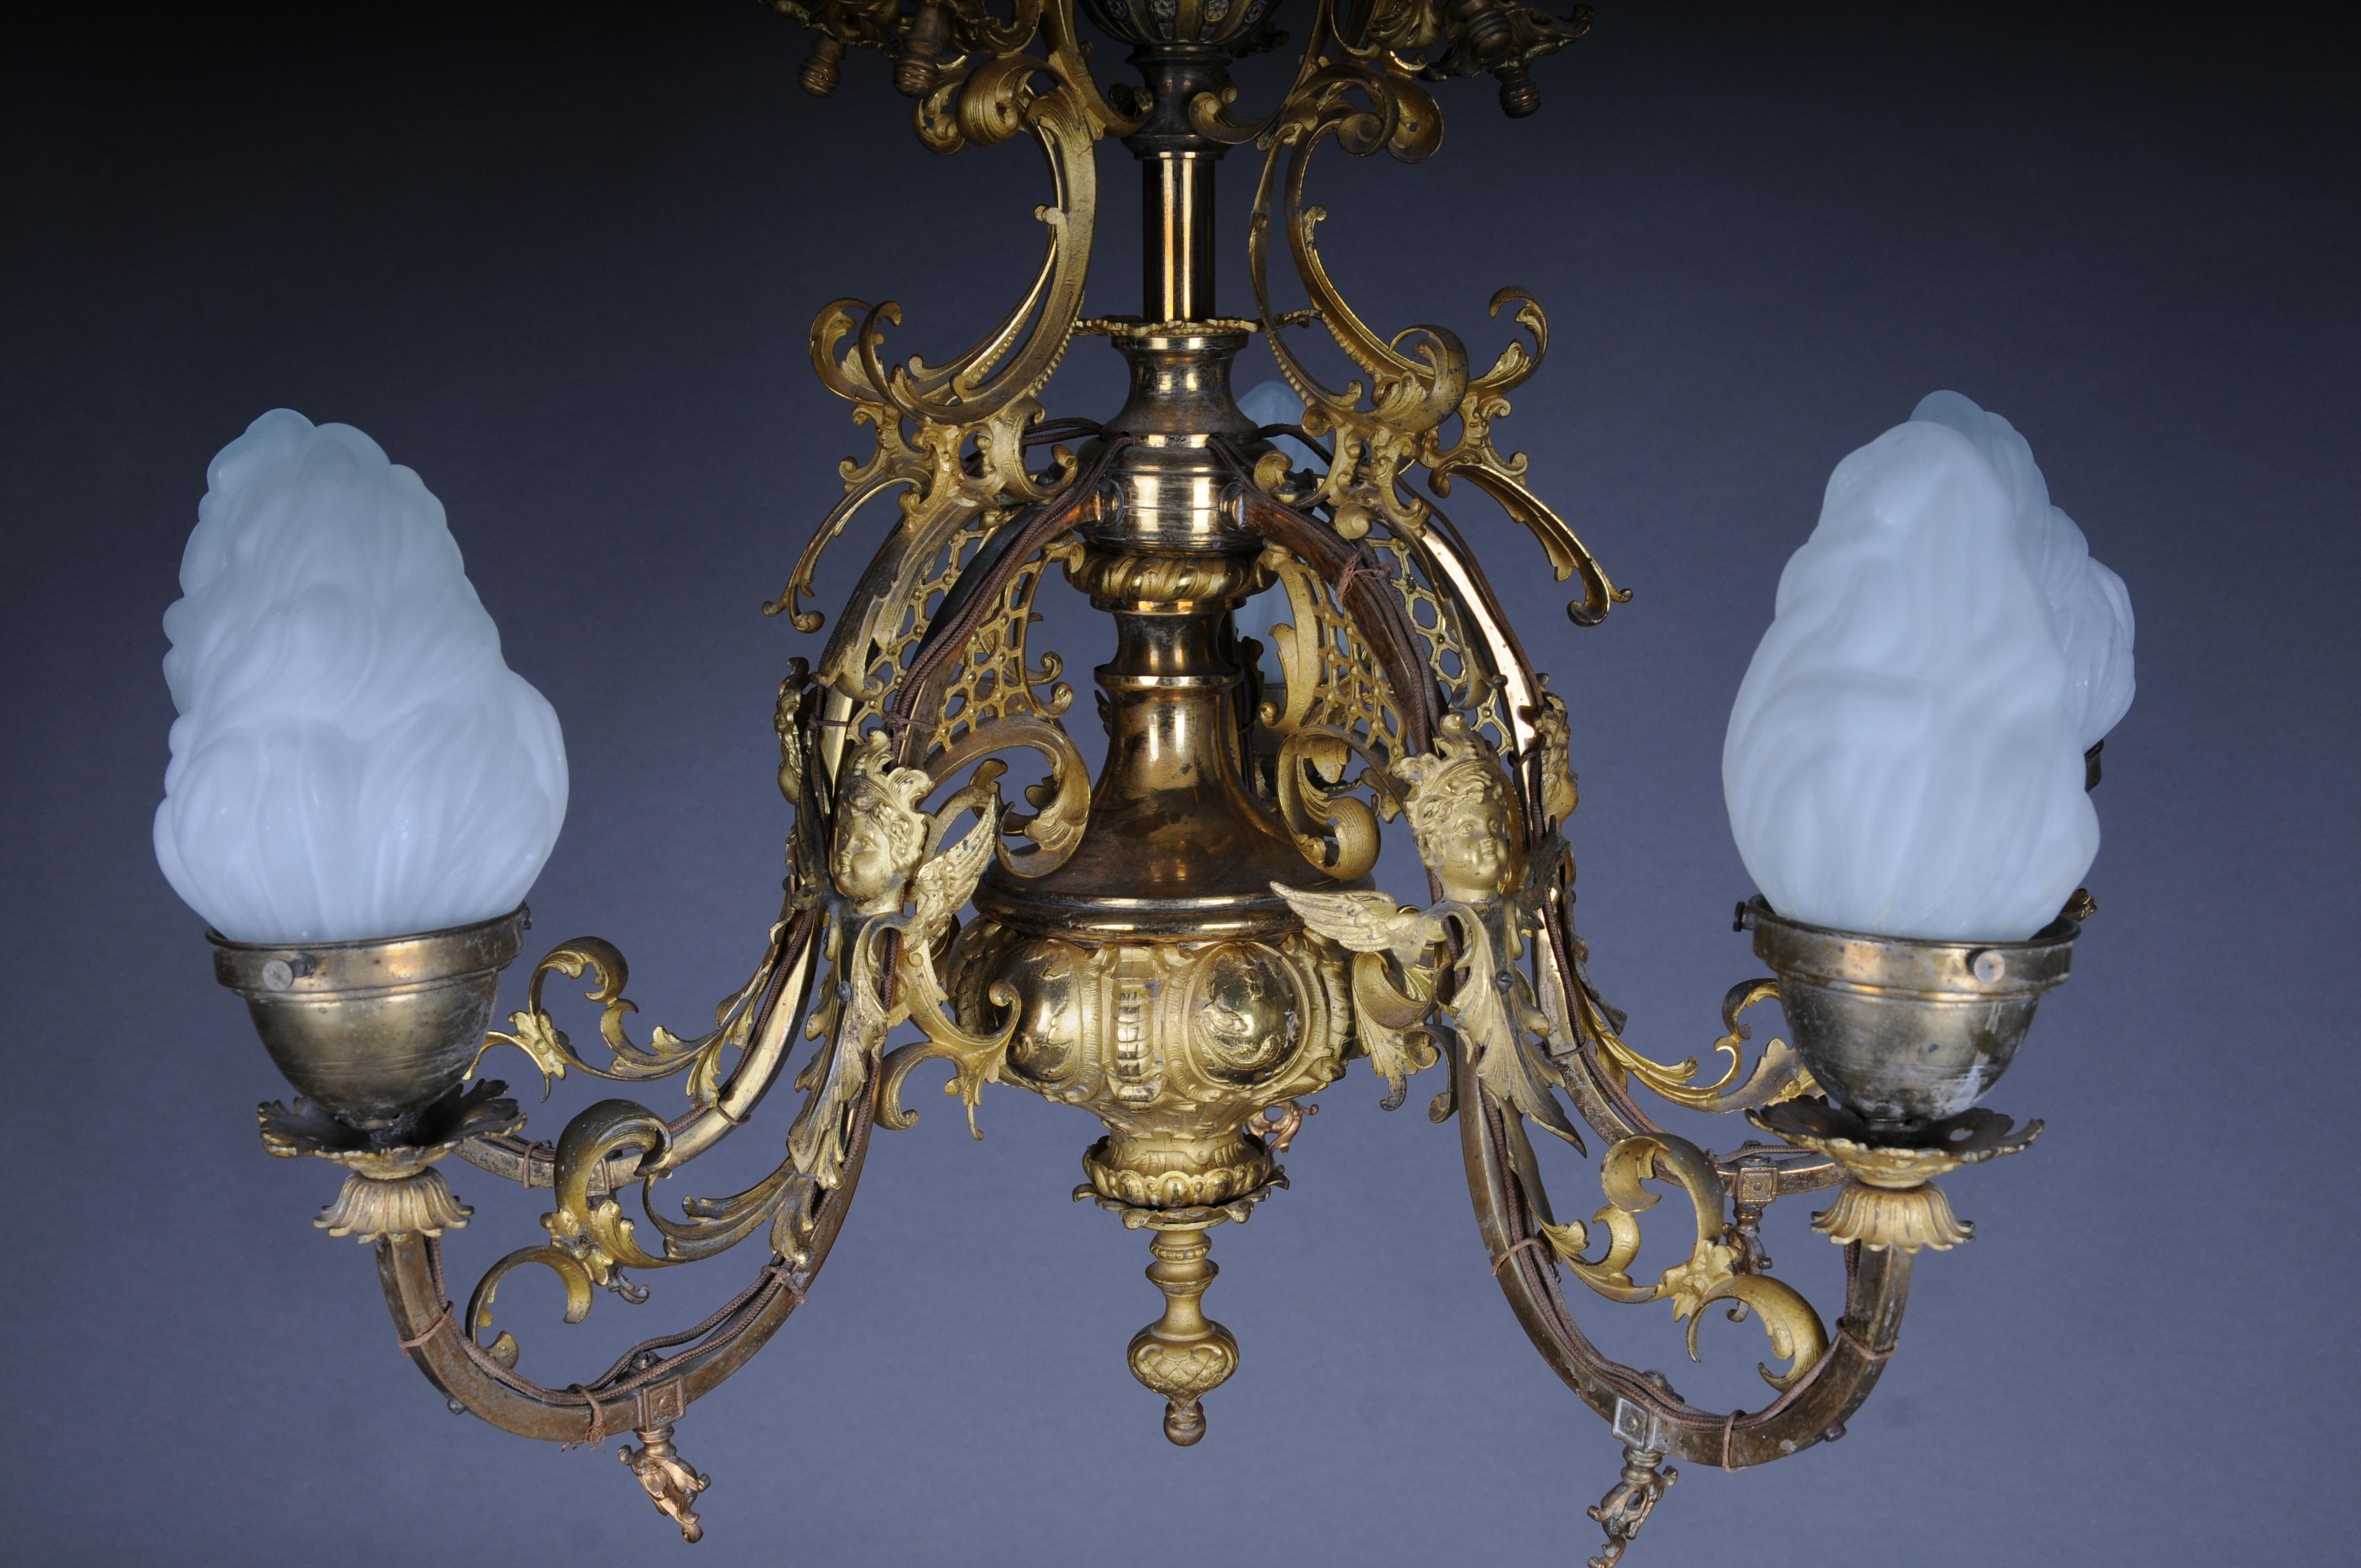 Antique Hisorism Magnificent chandelier, bronze, gold, around 1880

Voluminous body with curved light arms. 5 light arms.

fine gilding. An absolute eye-catcher.